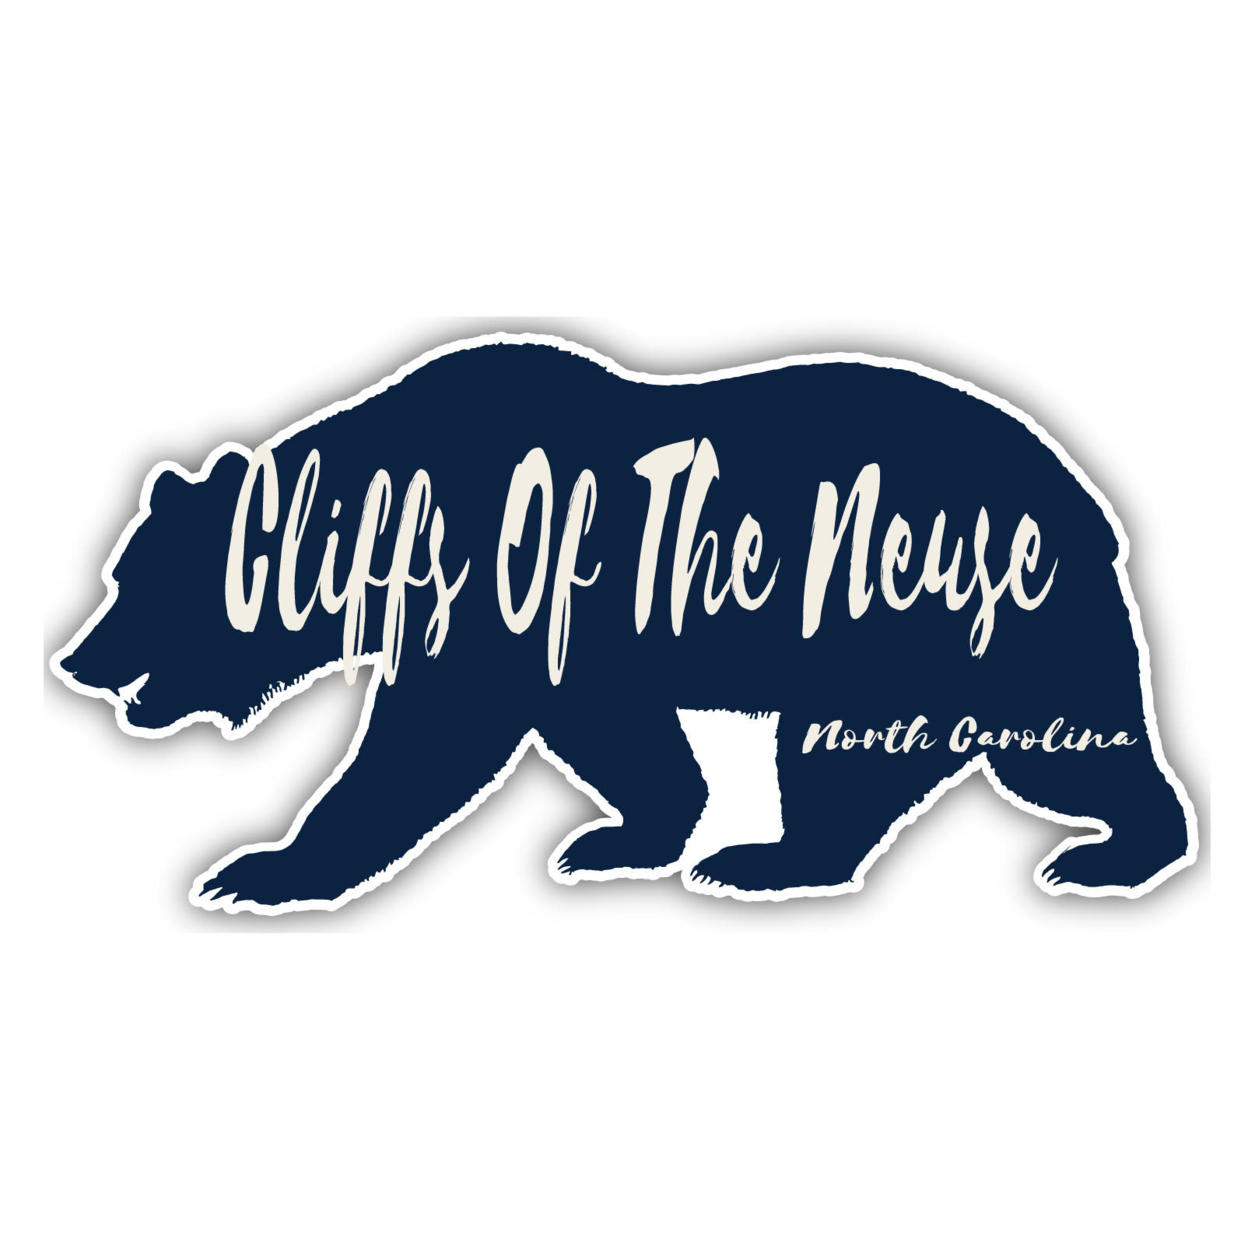 Cliffs Of The Neuse North Carolina Souvenir Decorative Stickers (Choose Theme And Size) - 4-Pack, 4-Inch, Bear